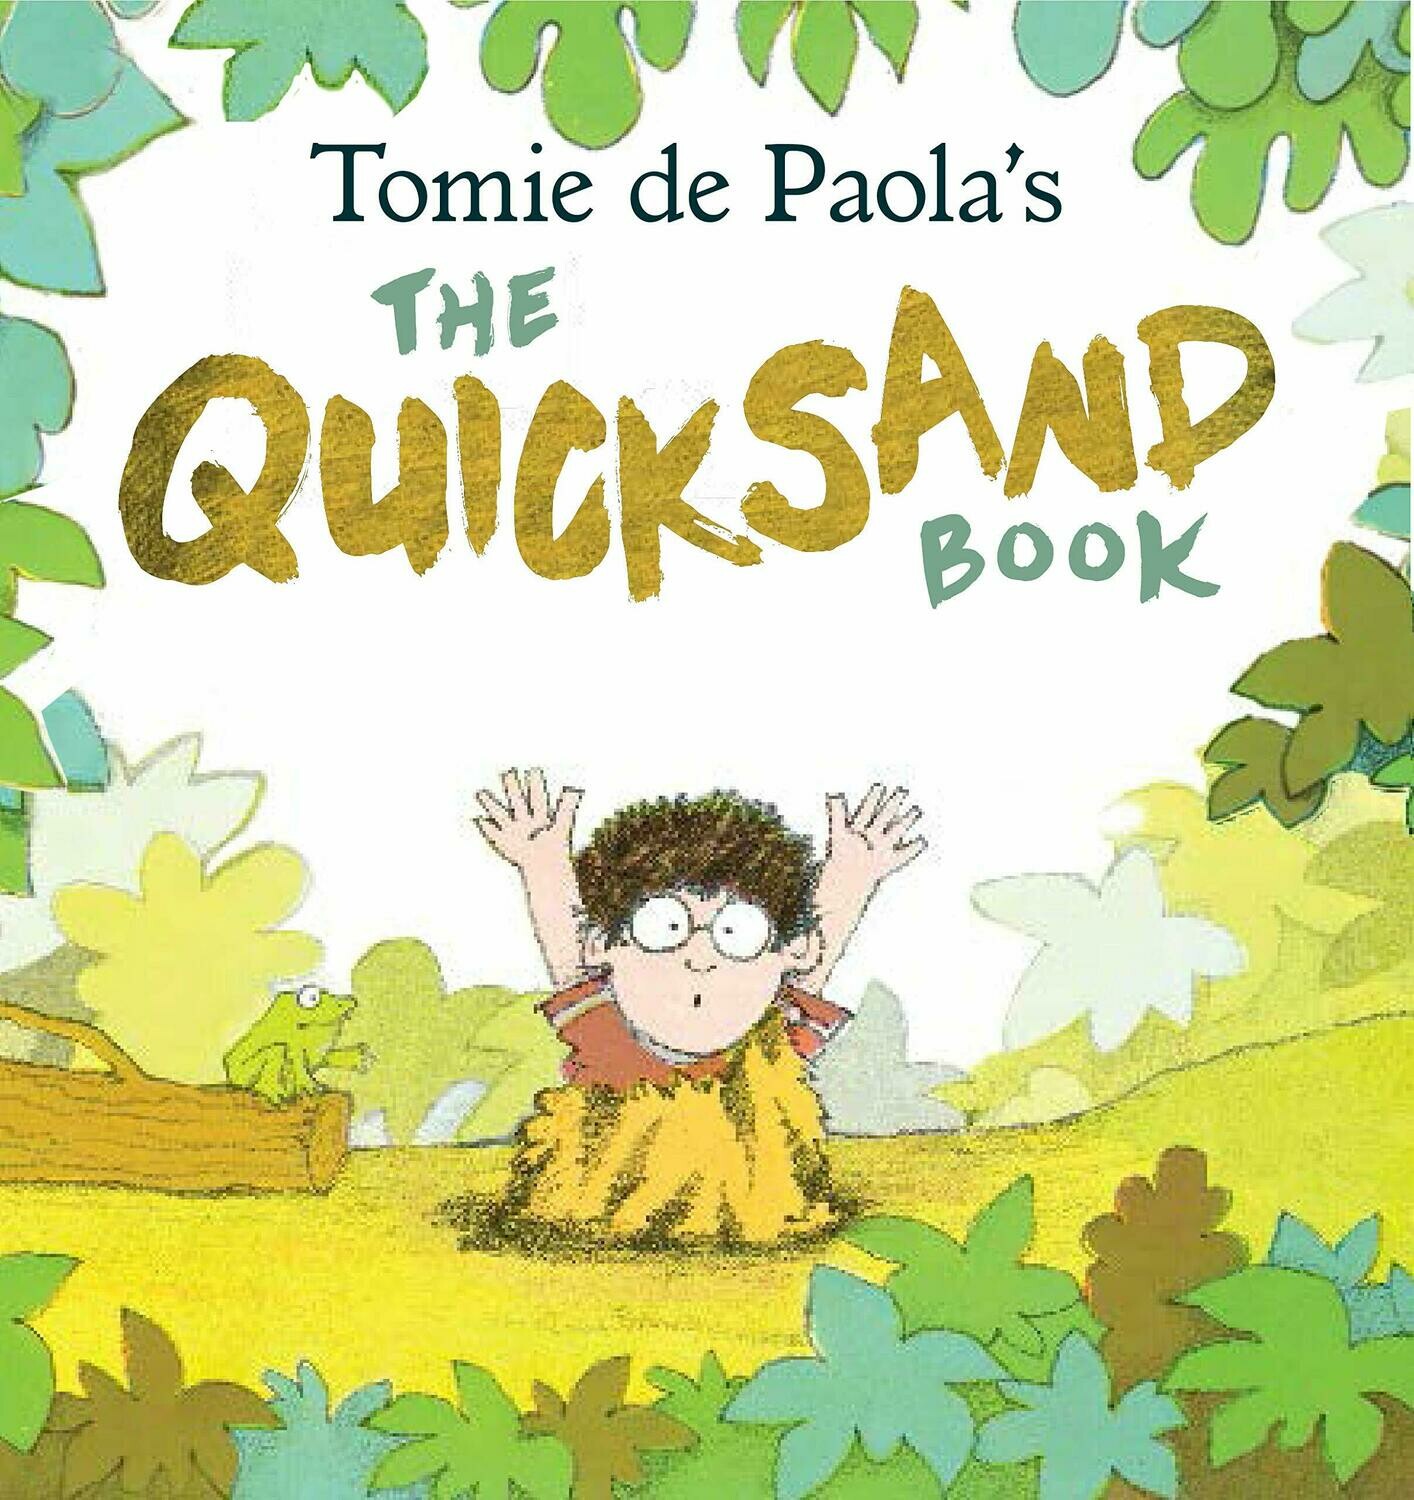 "The Quicksand Book"